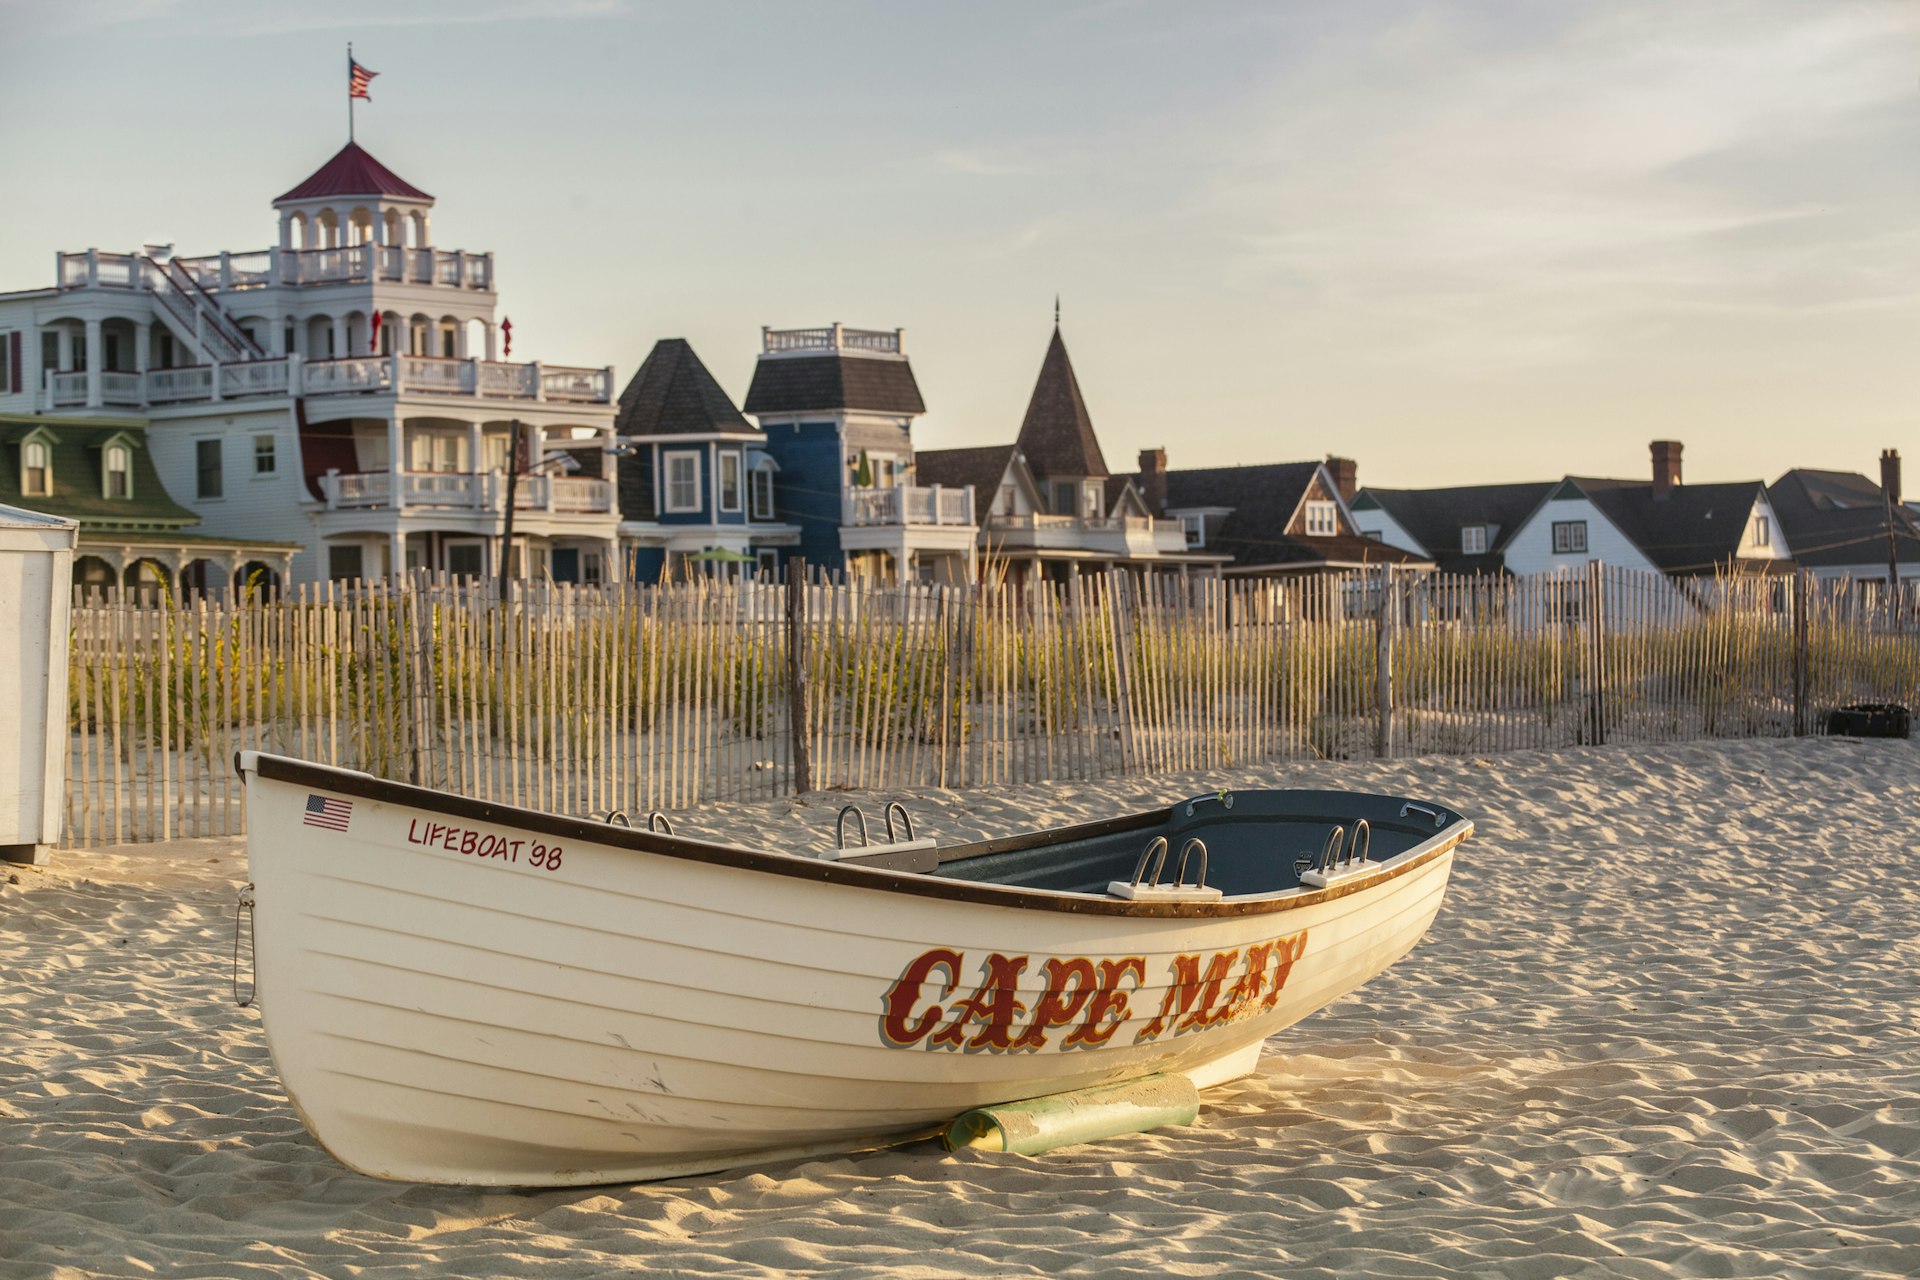 An empty wooded boat lays on the sand in Cape May. There are large Victorian Homes in the background. 